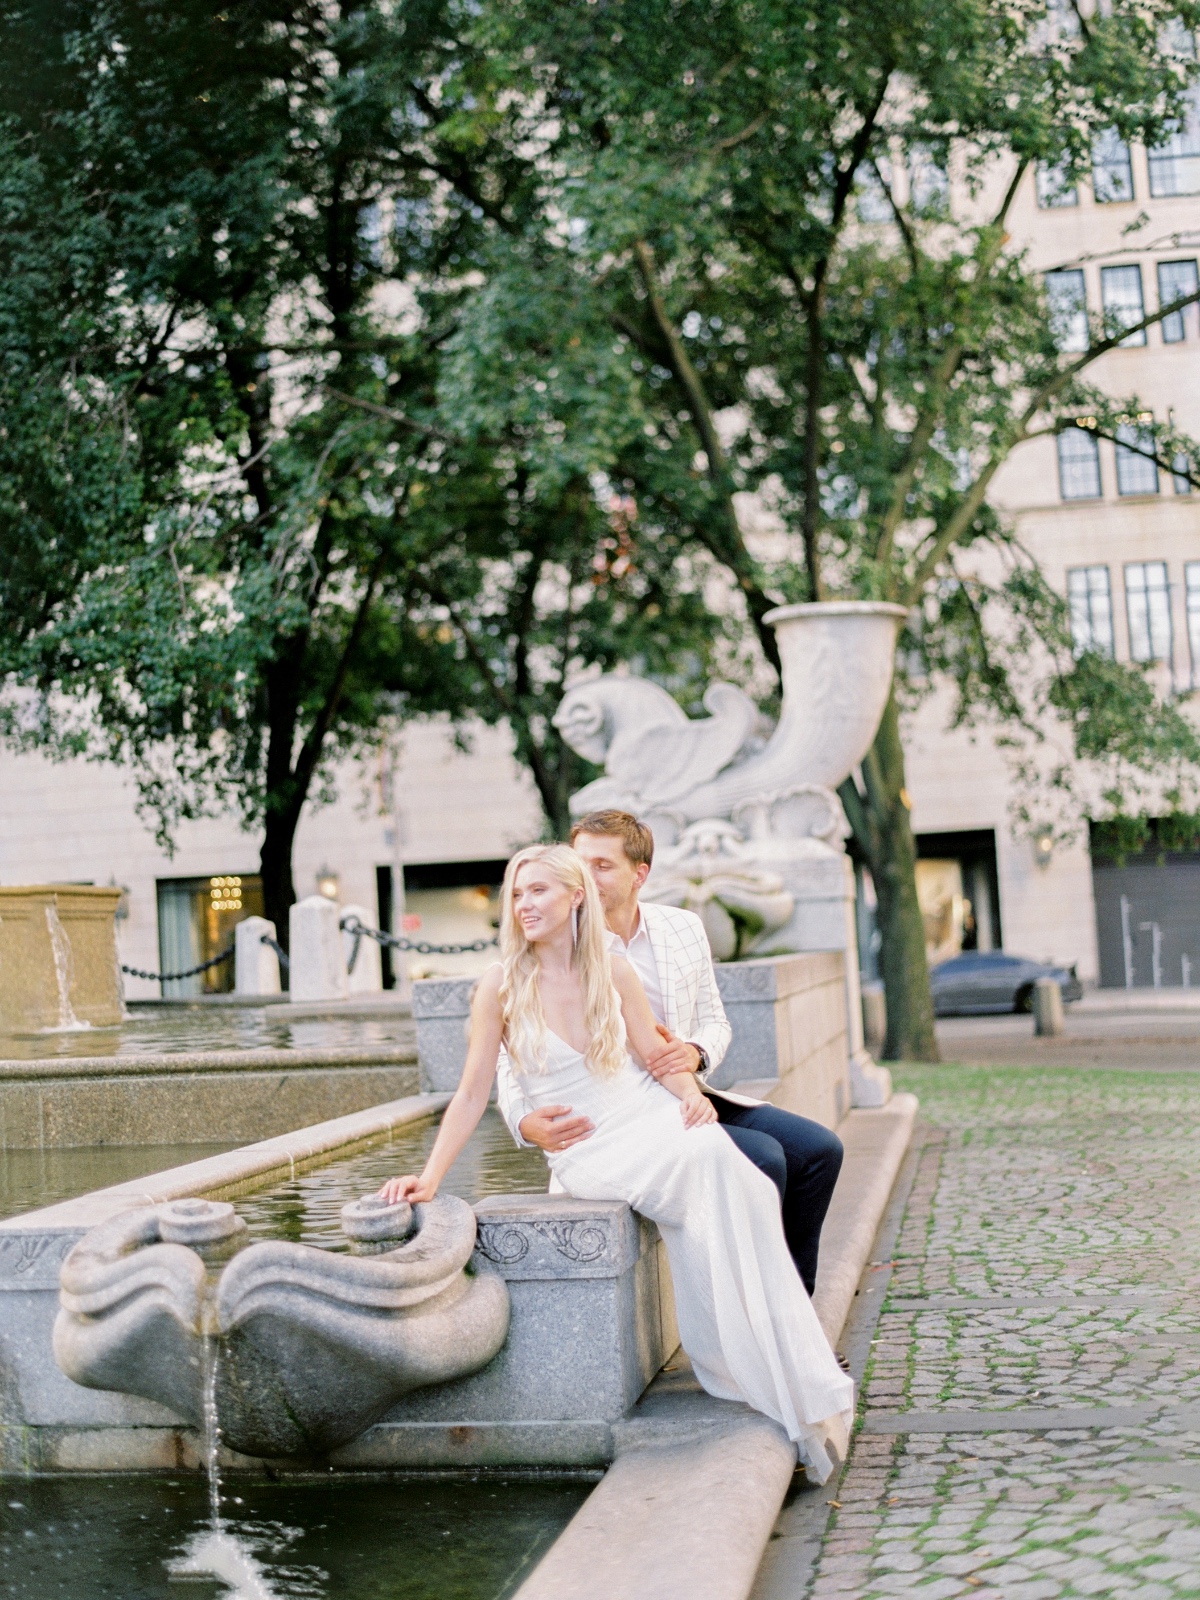 New York engagement session location ideas at Pulitzer Fountain